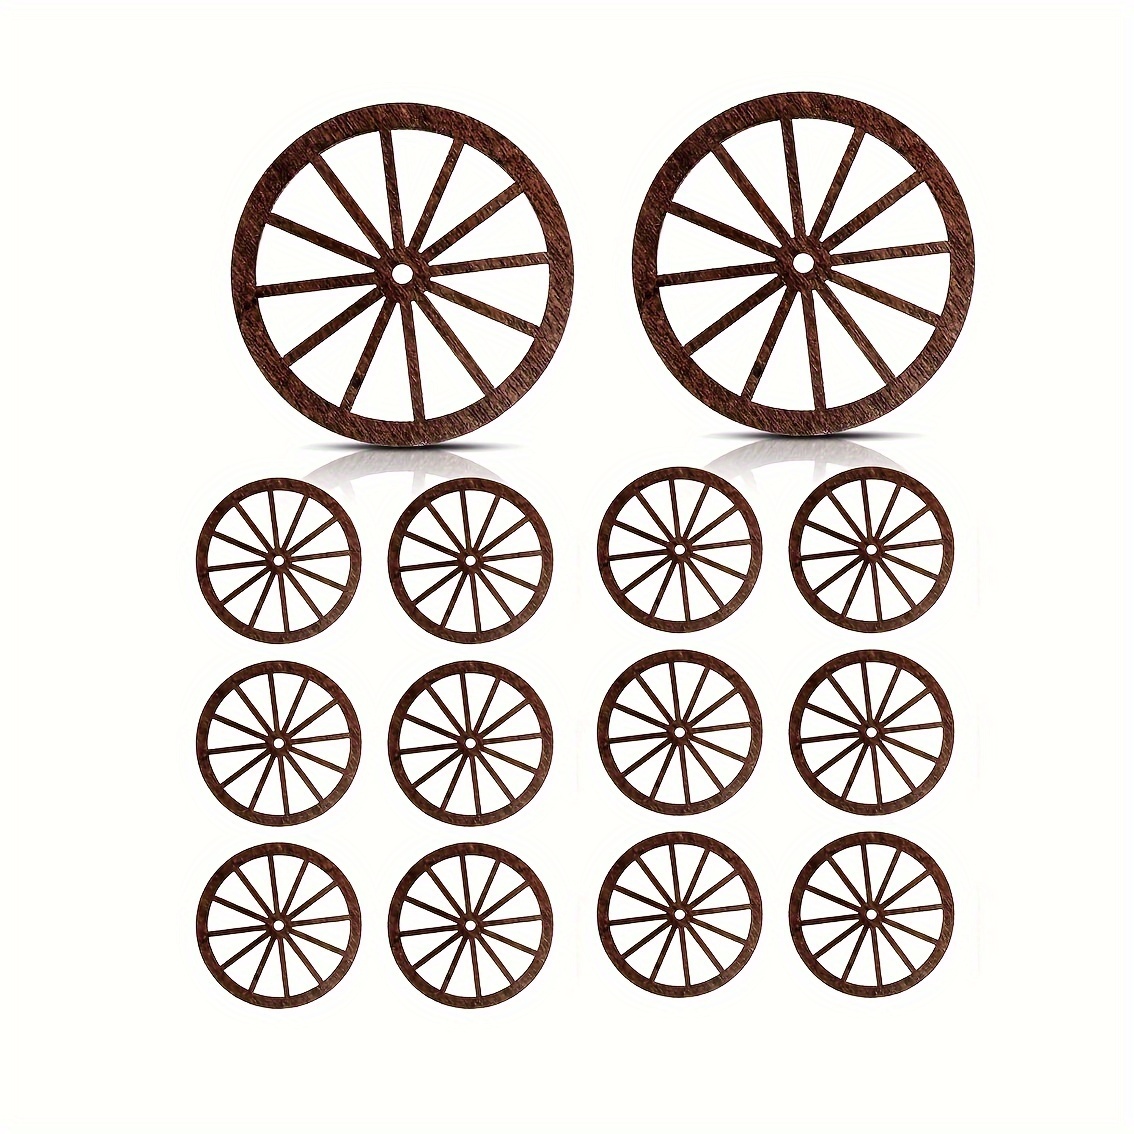 

12-piece Mini Wagon Wheels For Western Theme Parties - 1.97" Rustic Wooden Decorations, Perfect For Birthday Centerpieces & Wedding Favors